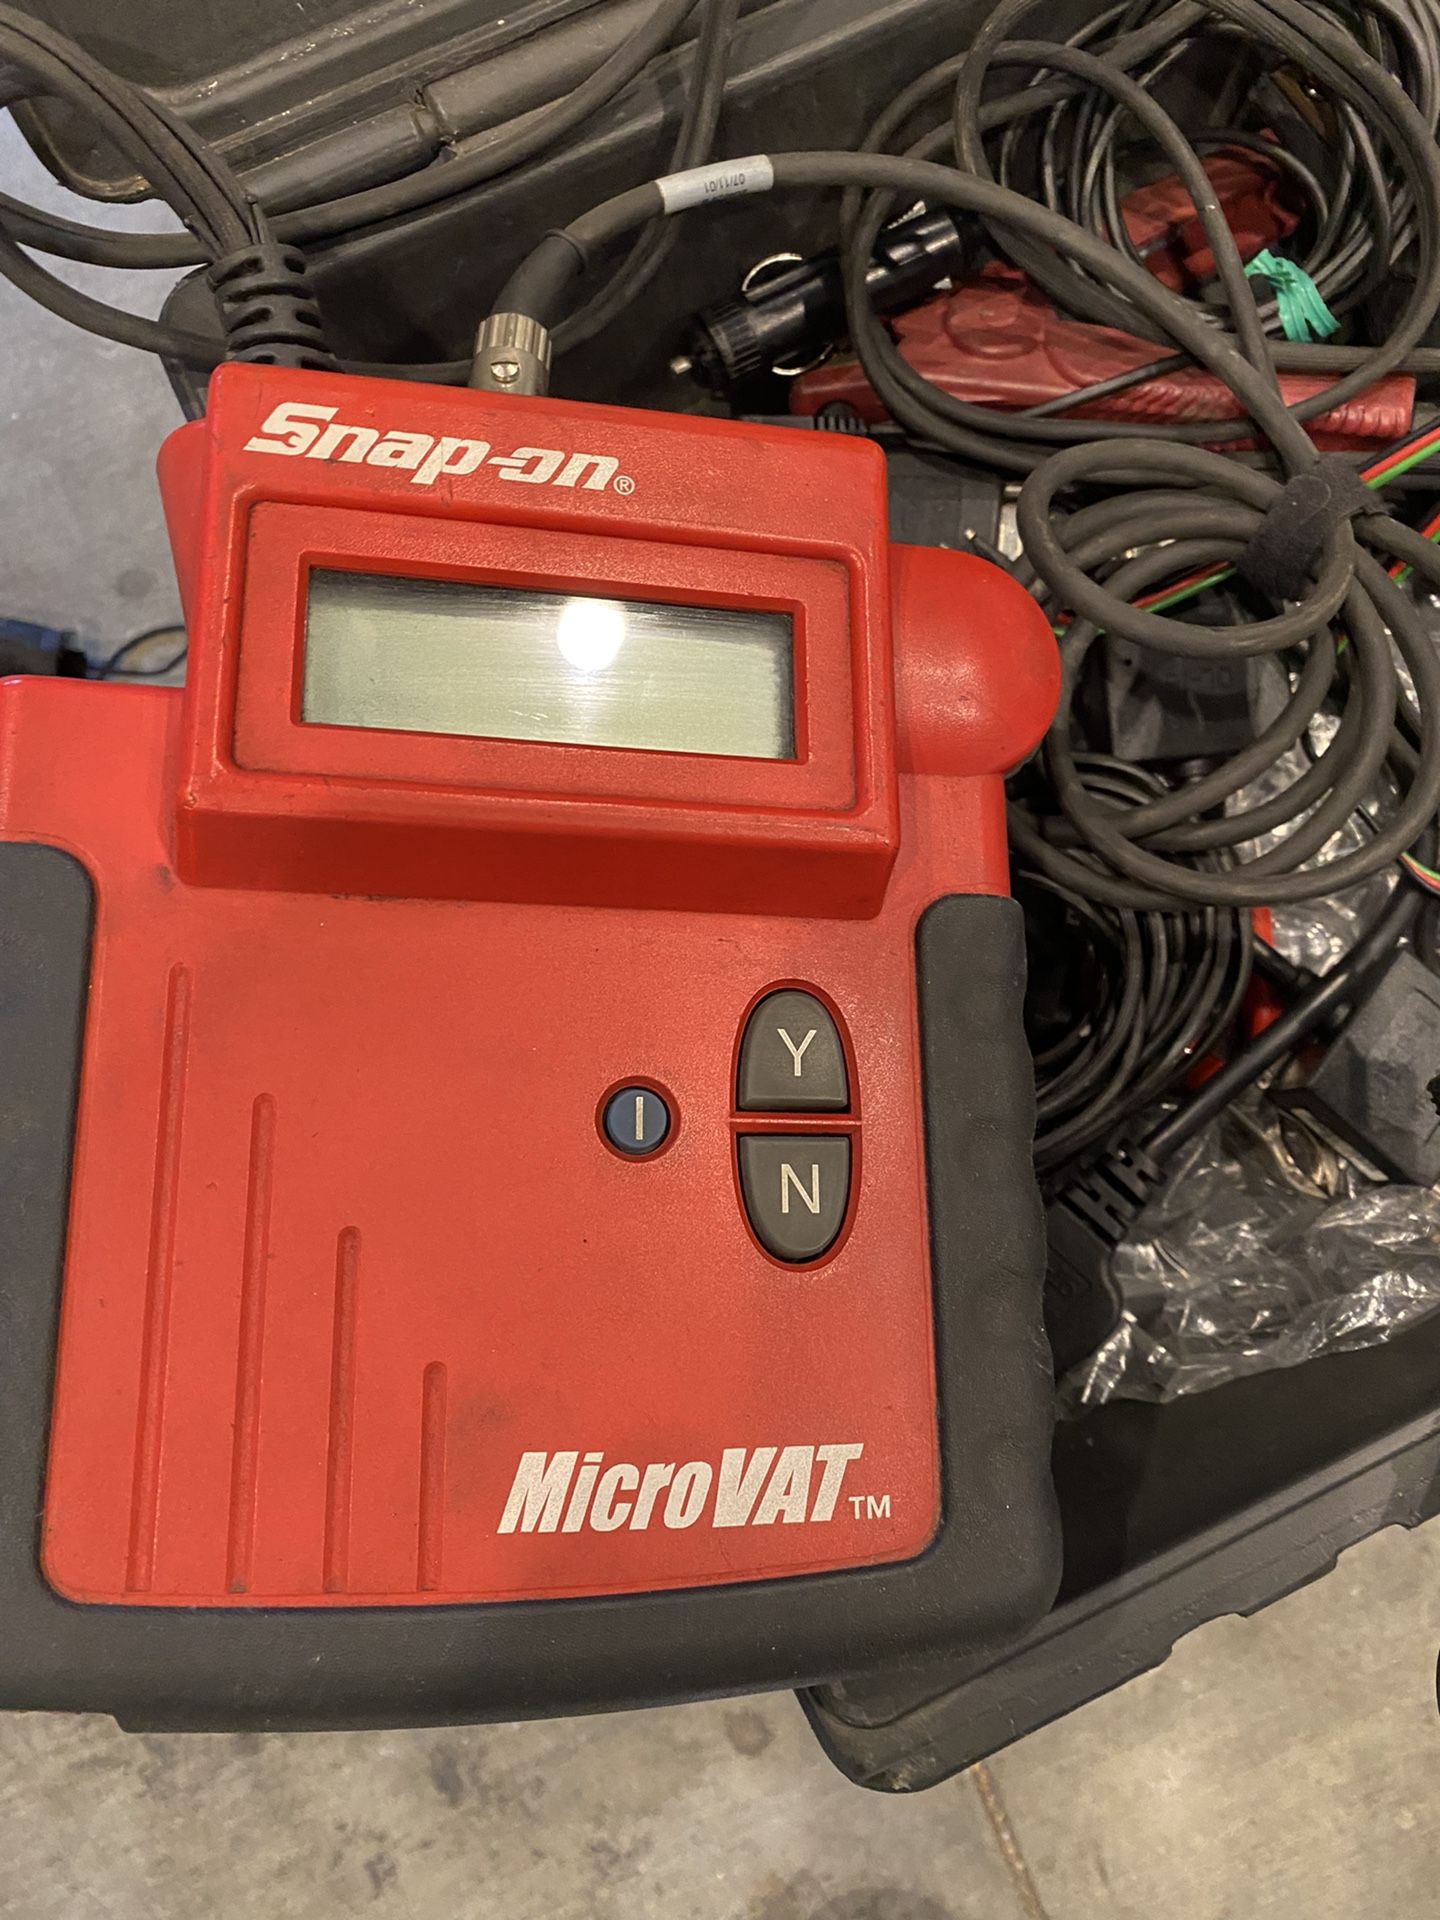 SNAPON MICROVAT 